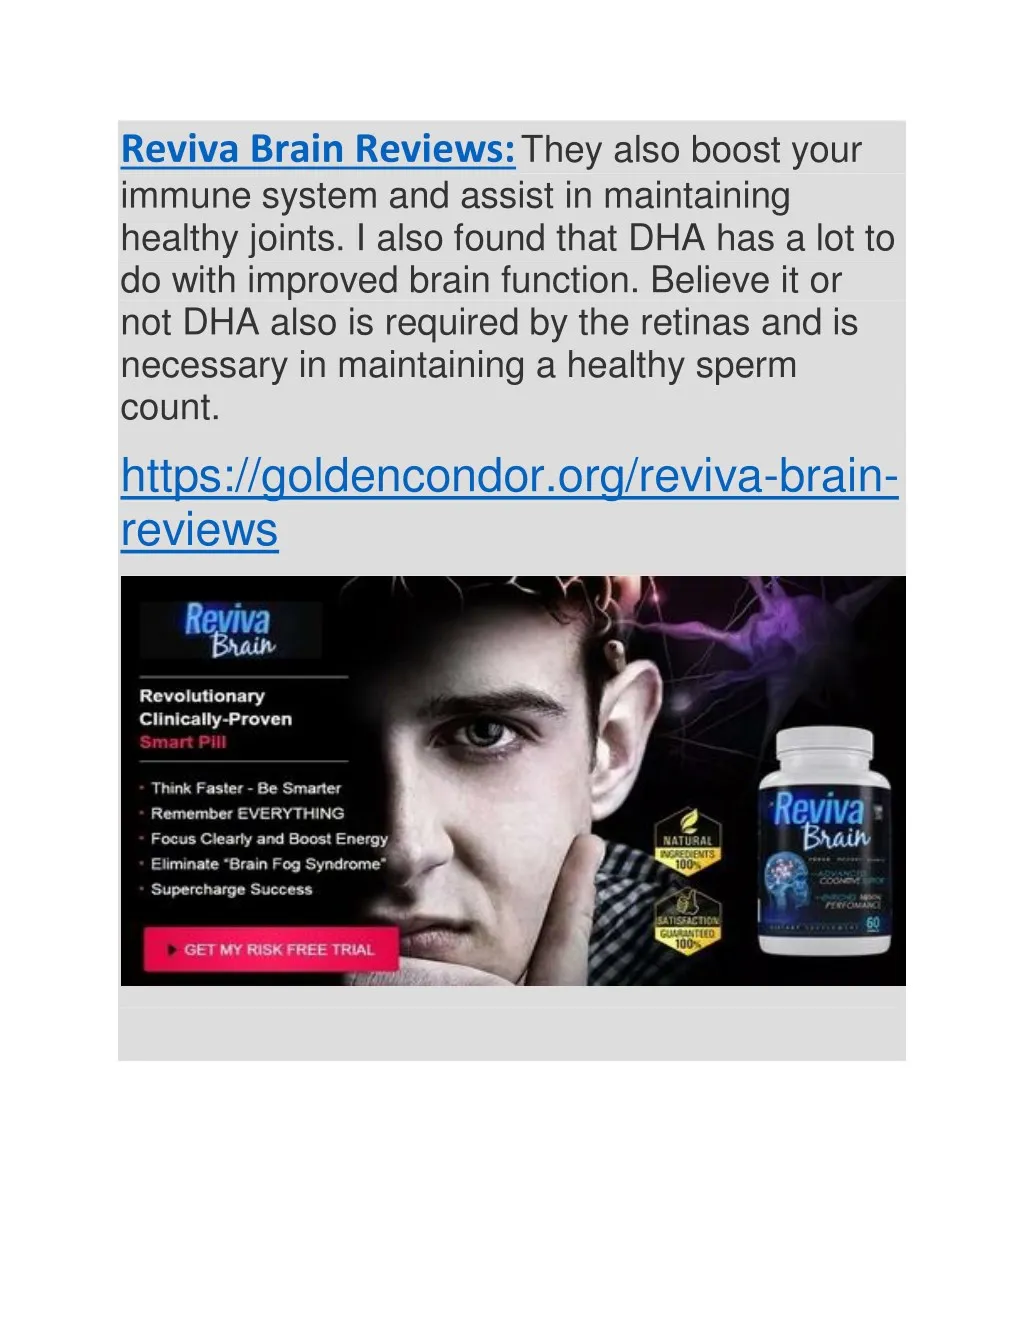 reviva brain reviews they also boost your immune